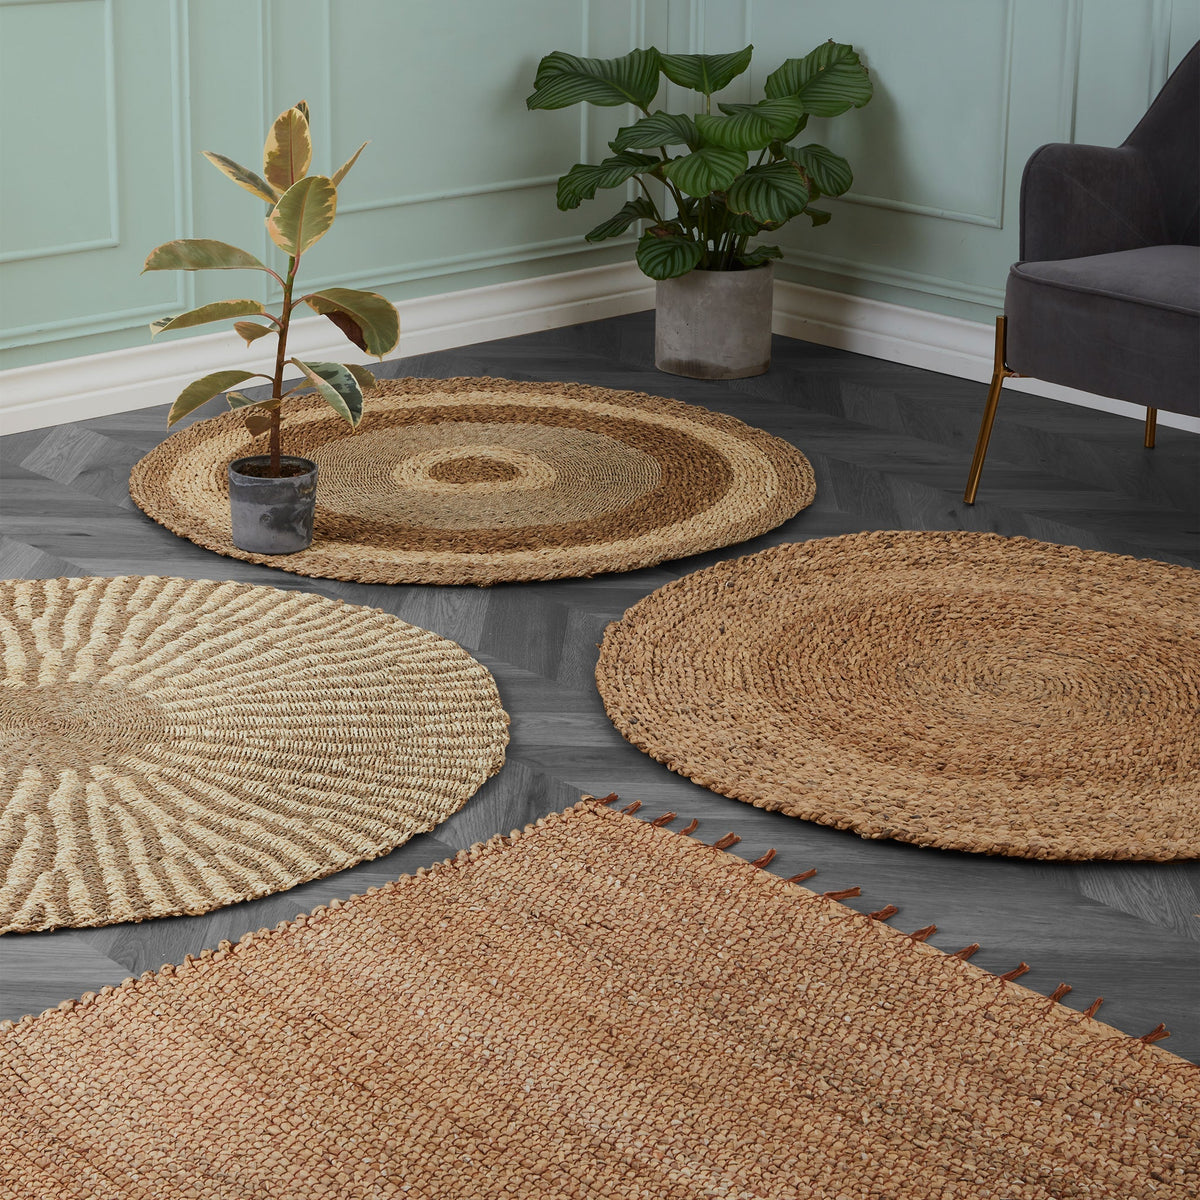 Woven Light Brown Water Hyacinth Round Rug